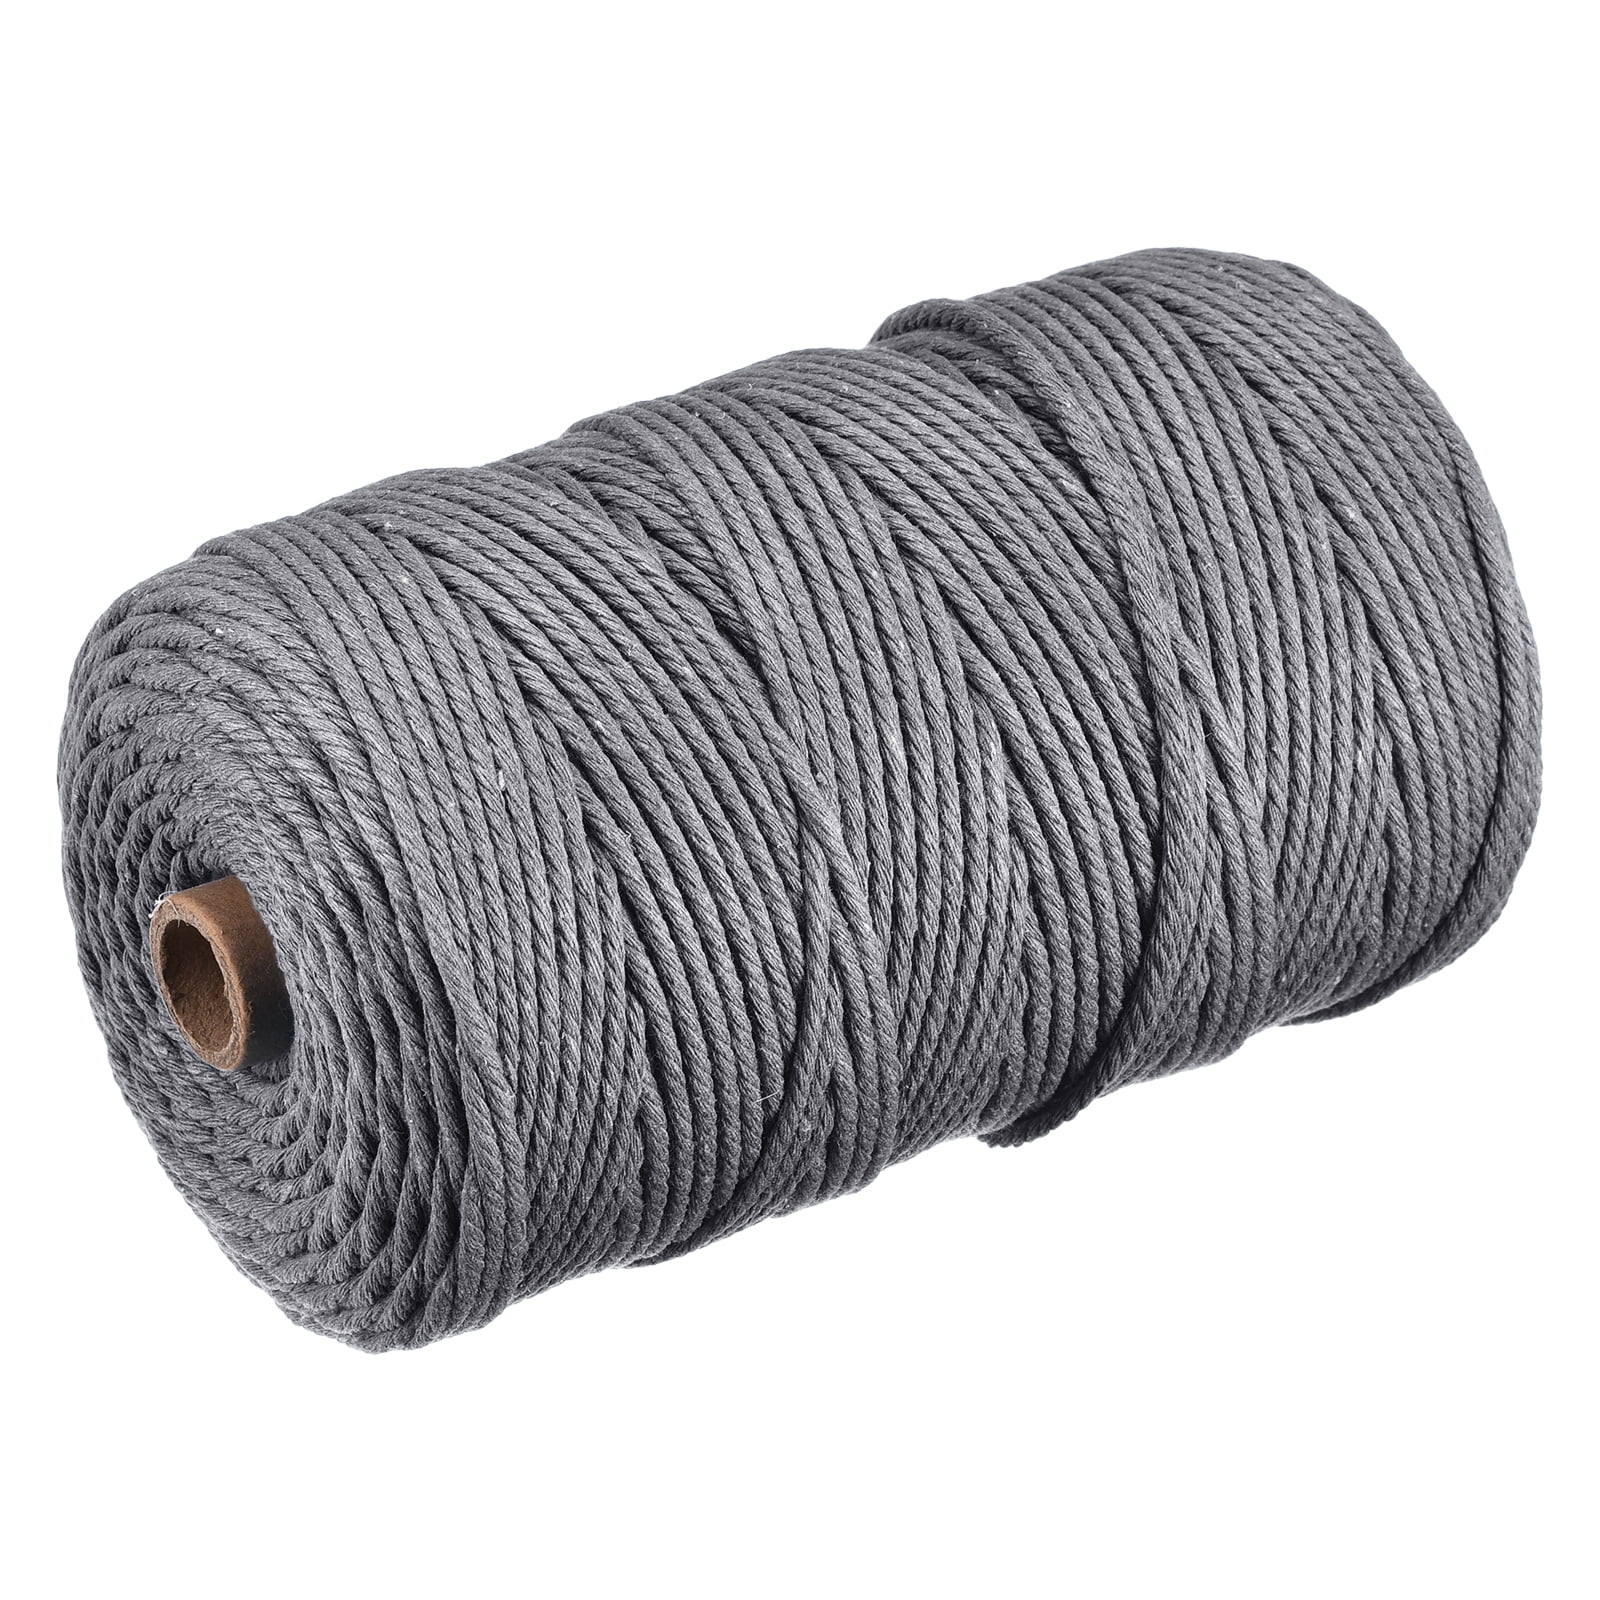 1 Roll Sewing Threads Cotton Rope 100Mx2mm Colored String Braided Woven  Crafts Macrame Cord – the best products in the Joom Geek online store